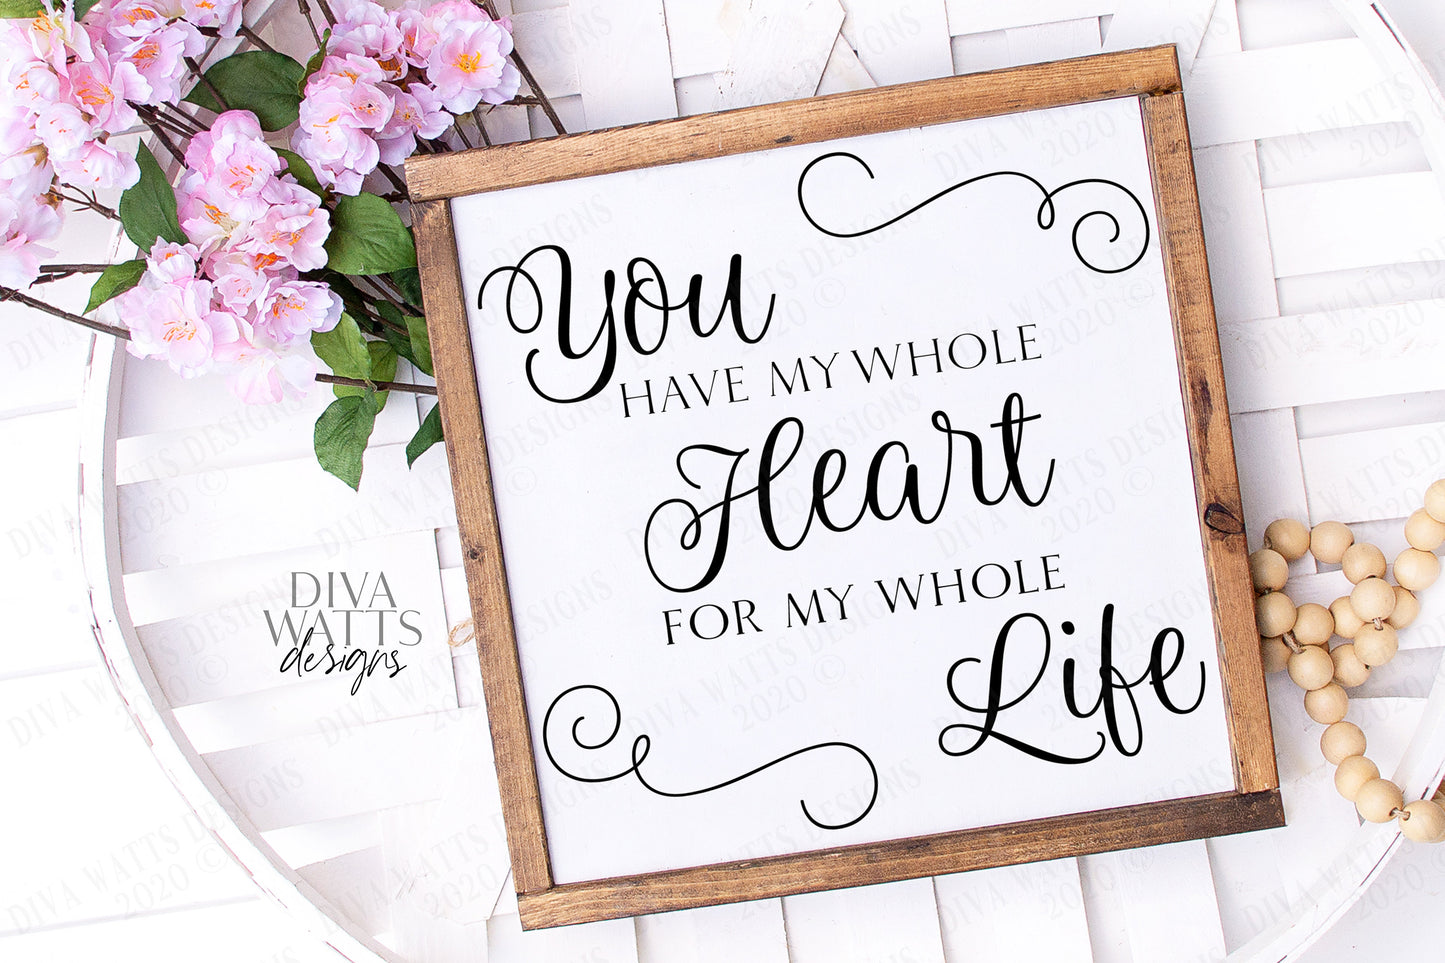 SVG | You Have My Whole Heart For My Whole Life | Cutting File | Vinyl Stencil HTV | Love Romance Wedding Anniversary | Sign | eps jpg pdf